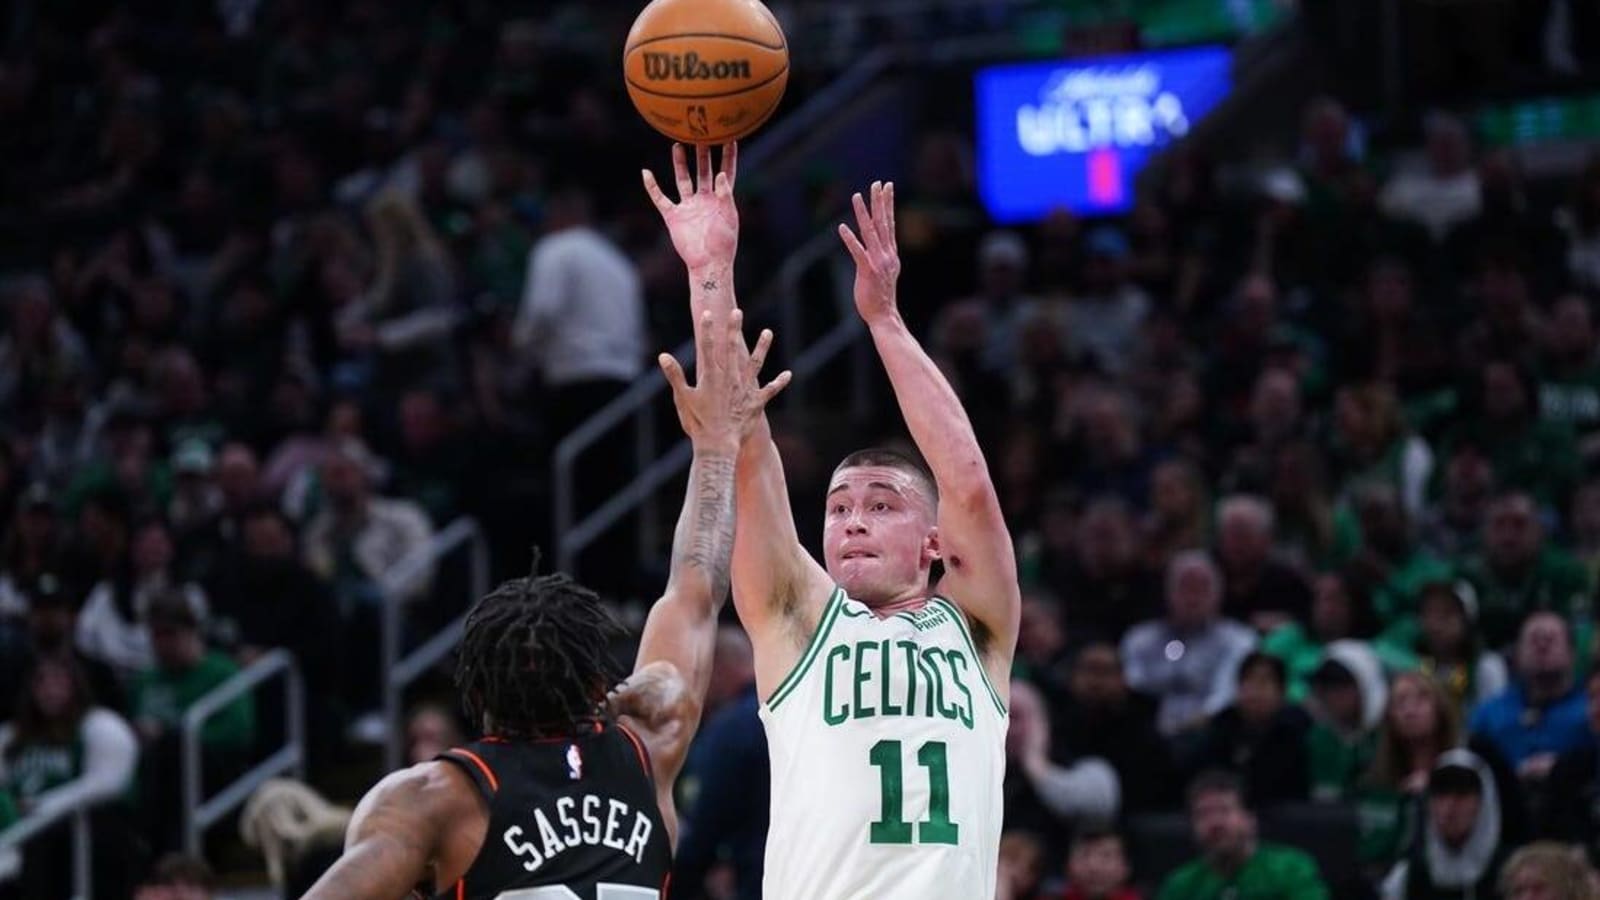 Celtics roll over Pistons for 9th straight home win